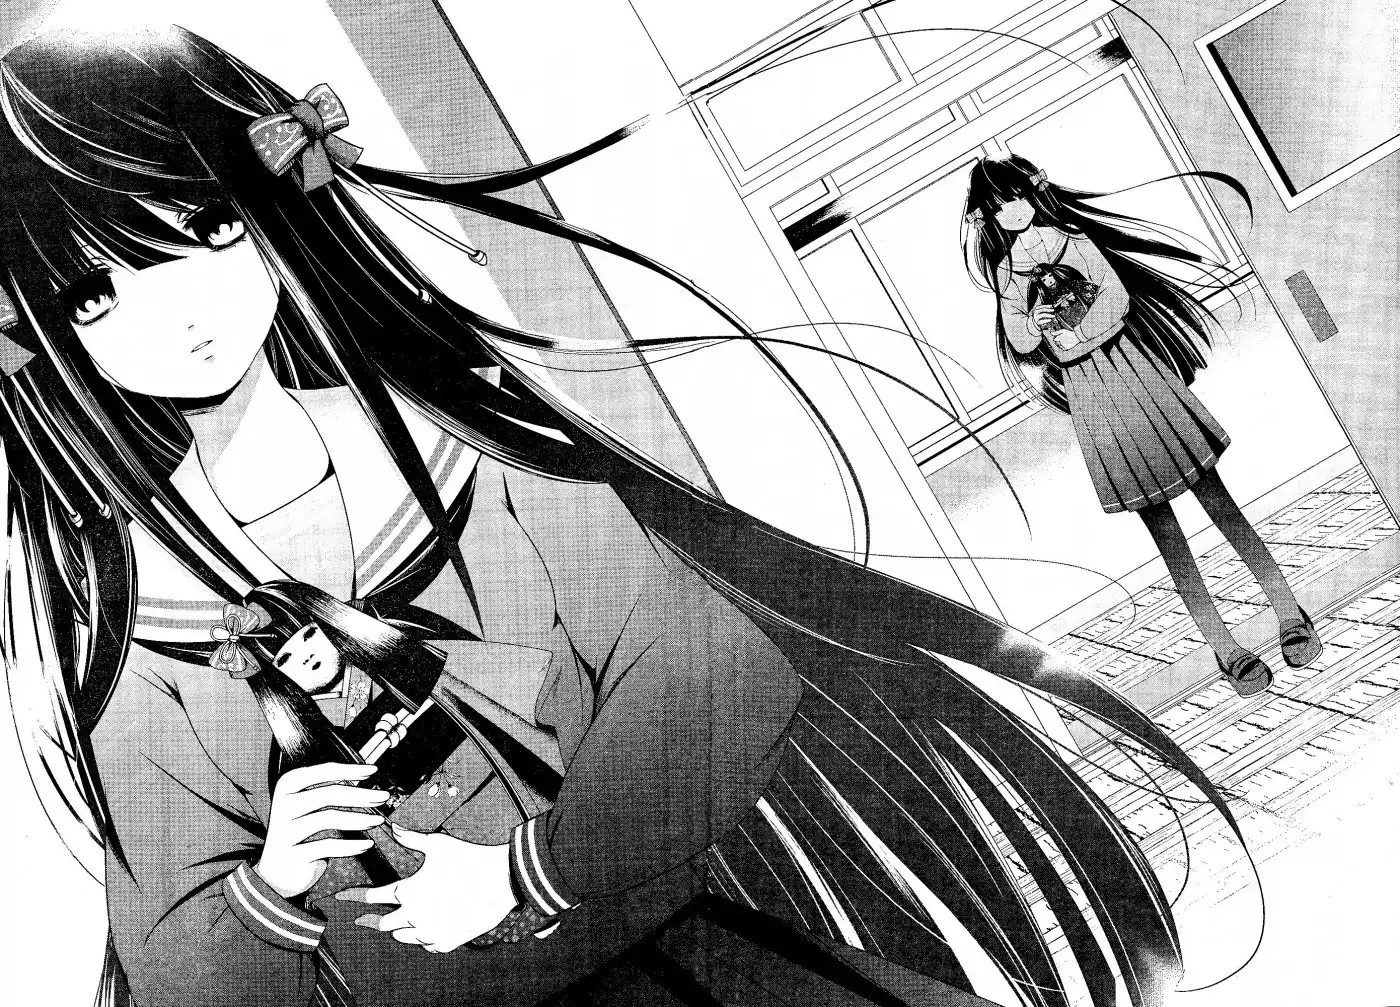 Iwaihime Chapter 1